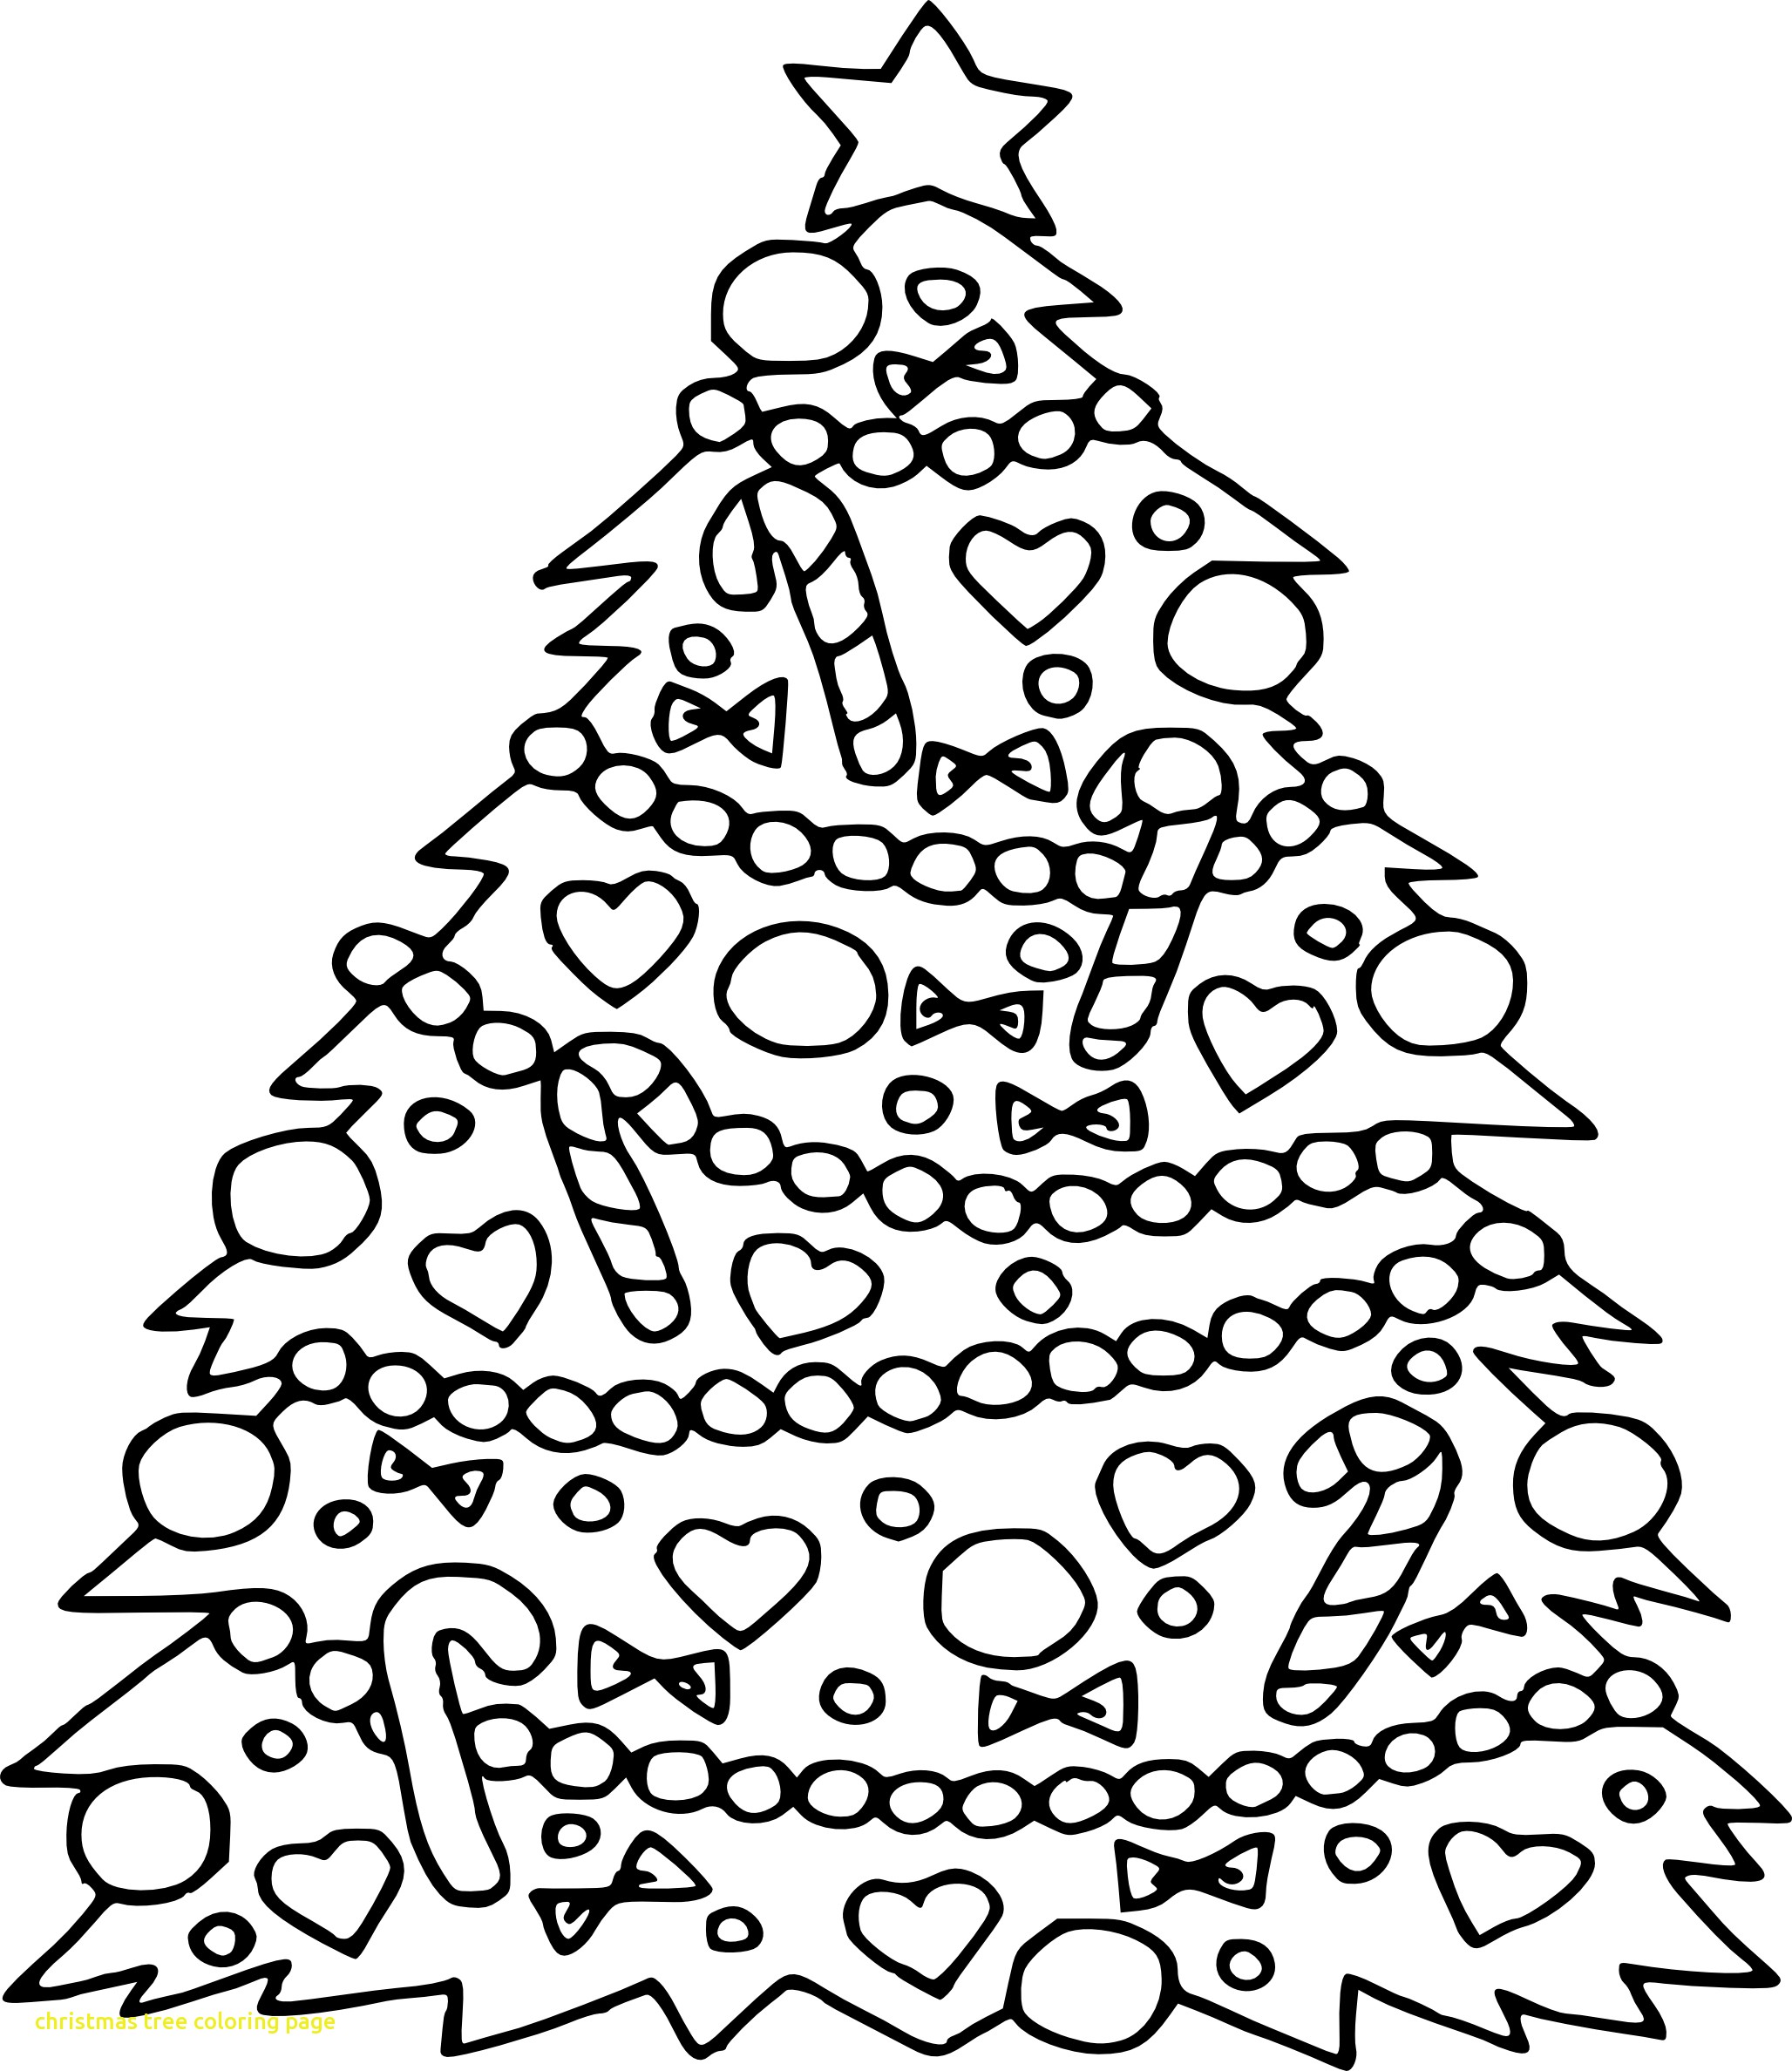 Pine Tree Coloring Page at GetColorings.com | Free ...